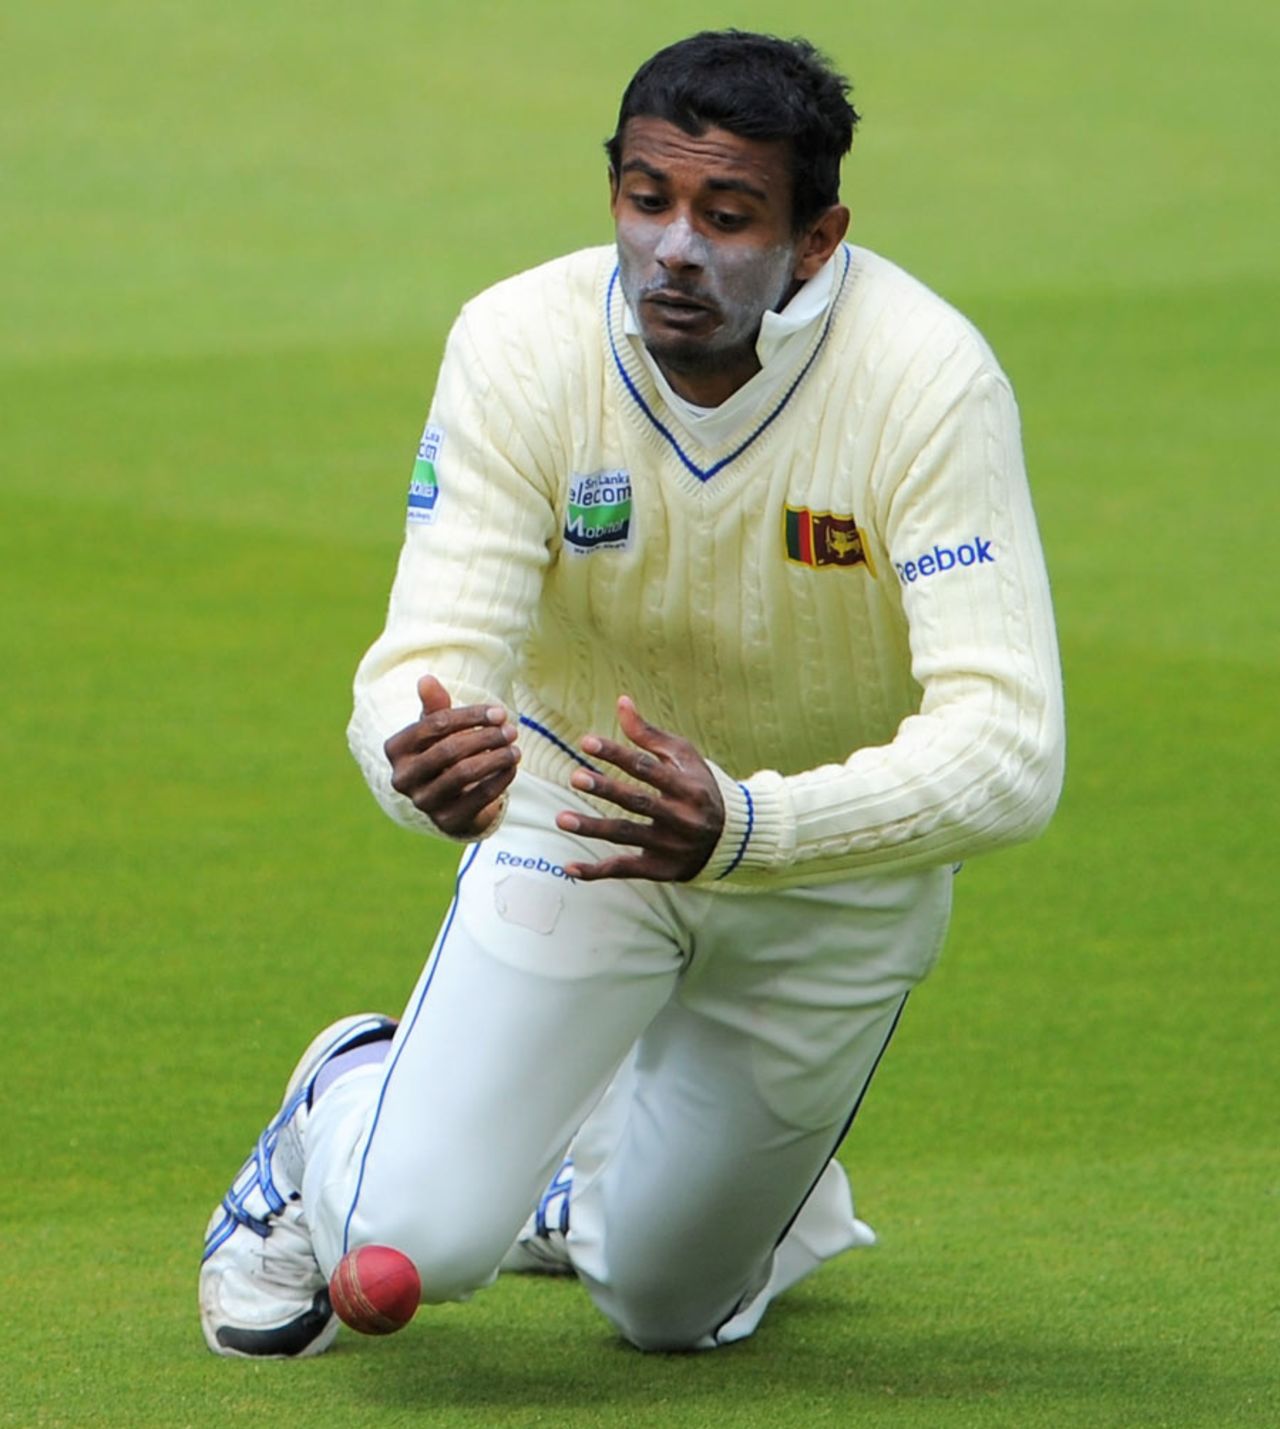 Farveez Maharoof spills a chance from Ian Bell, England v Sri Lanka, 2nd Test, Lord's, 5th day, June 7 2011